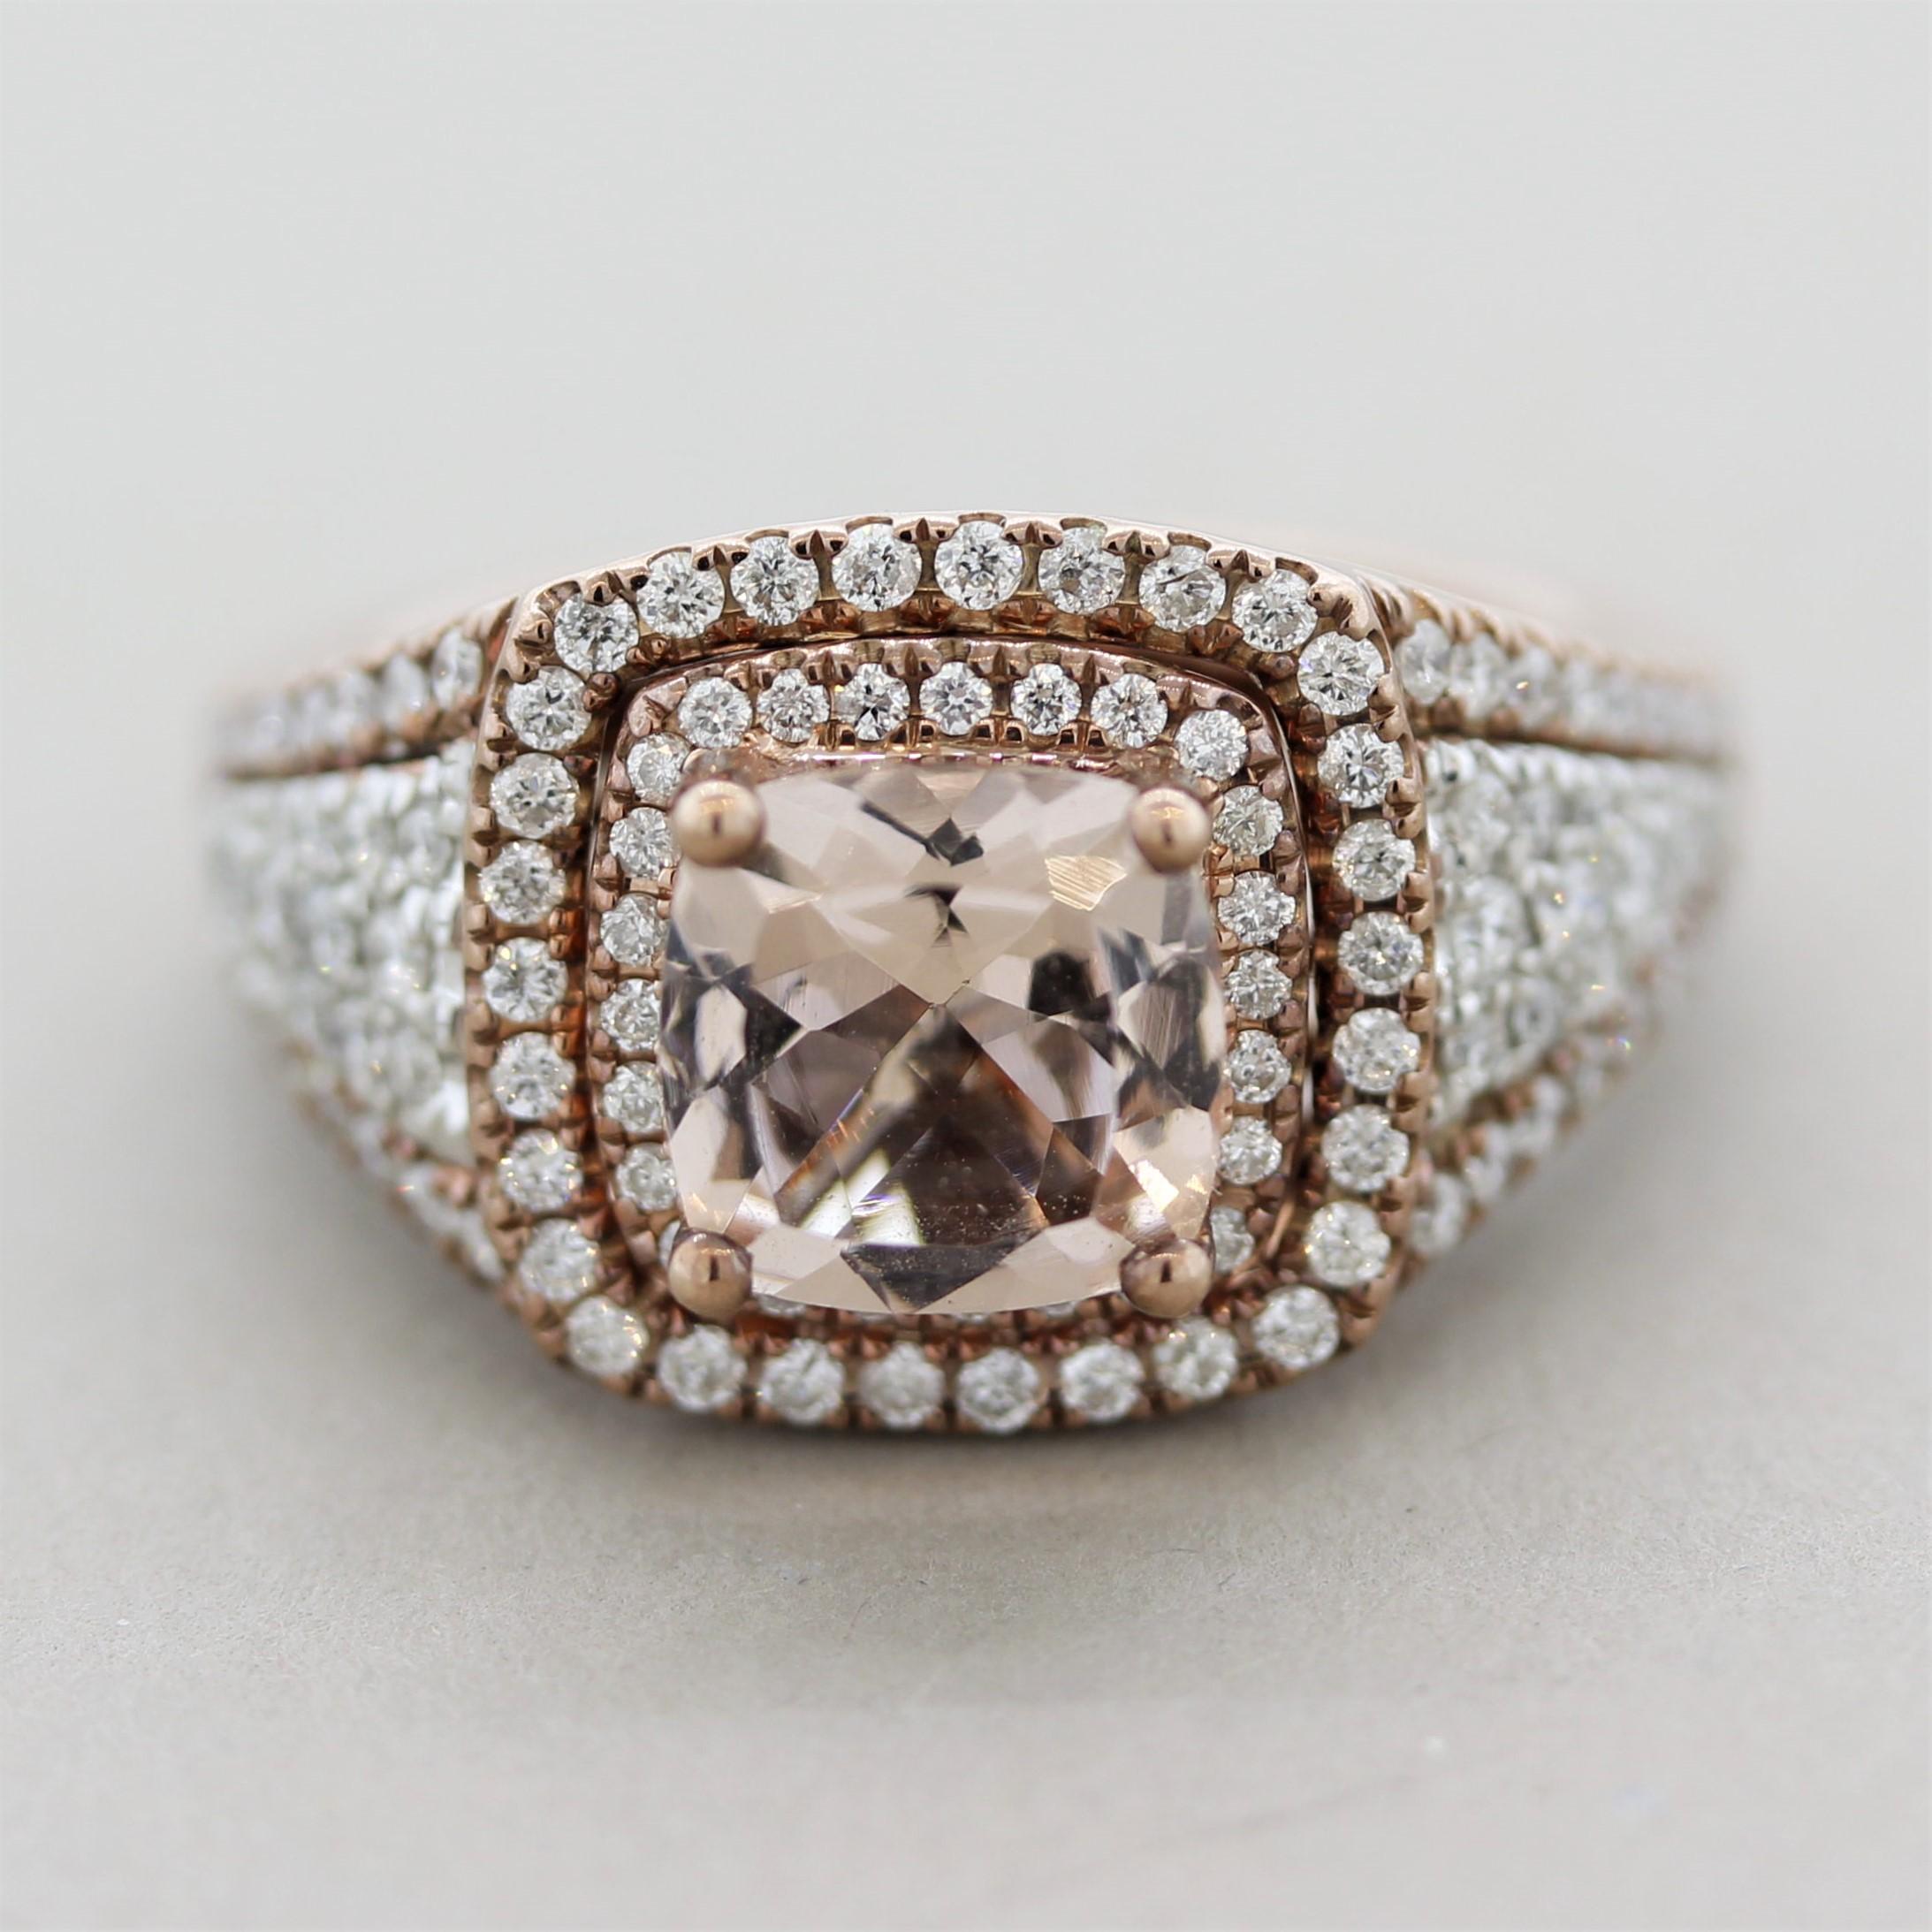 A special ring made in rose gold! It features a 2.05 carat cushion shaped morganite with the traditional soft pastel pink color. It is accented by 1.18 carats of round brilliant-cut diamonds which are set on the shoulders of the ring as well as